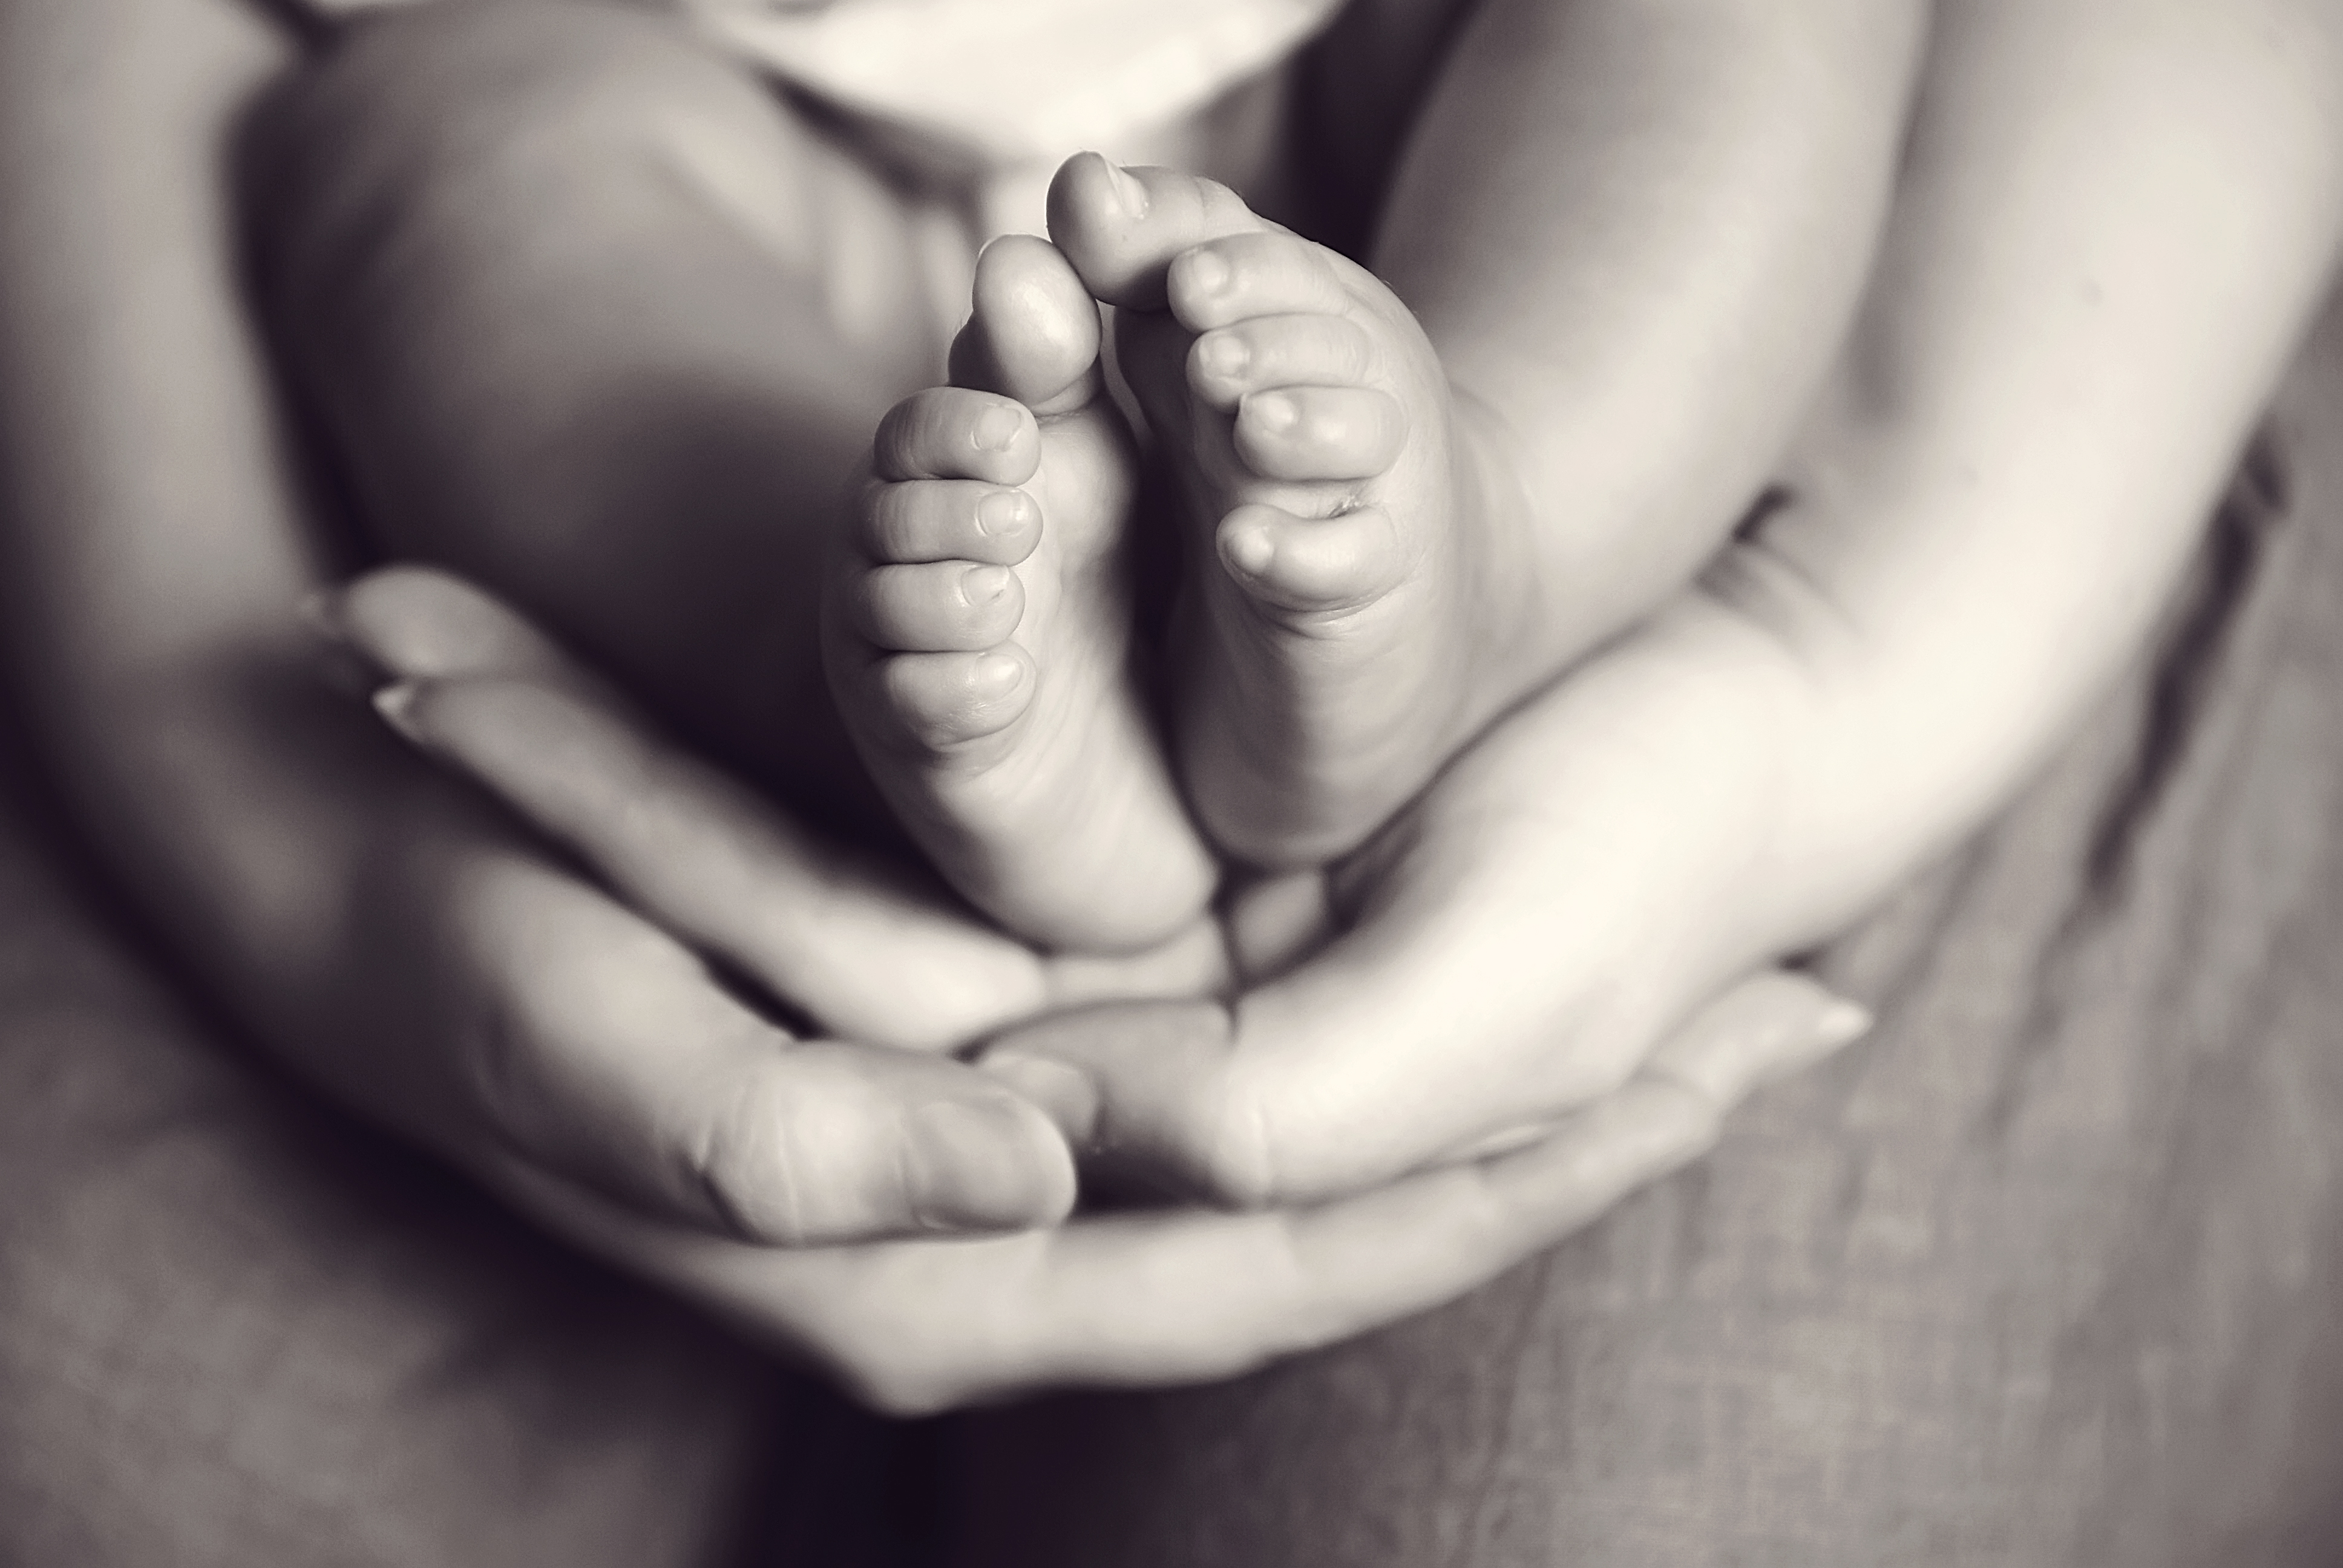 Infant feet and adult hands